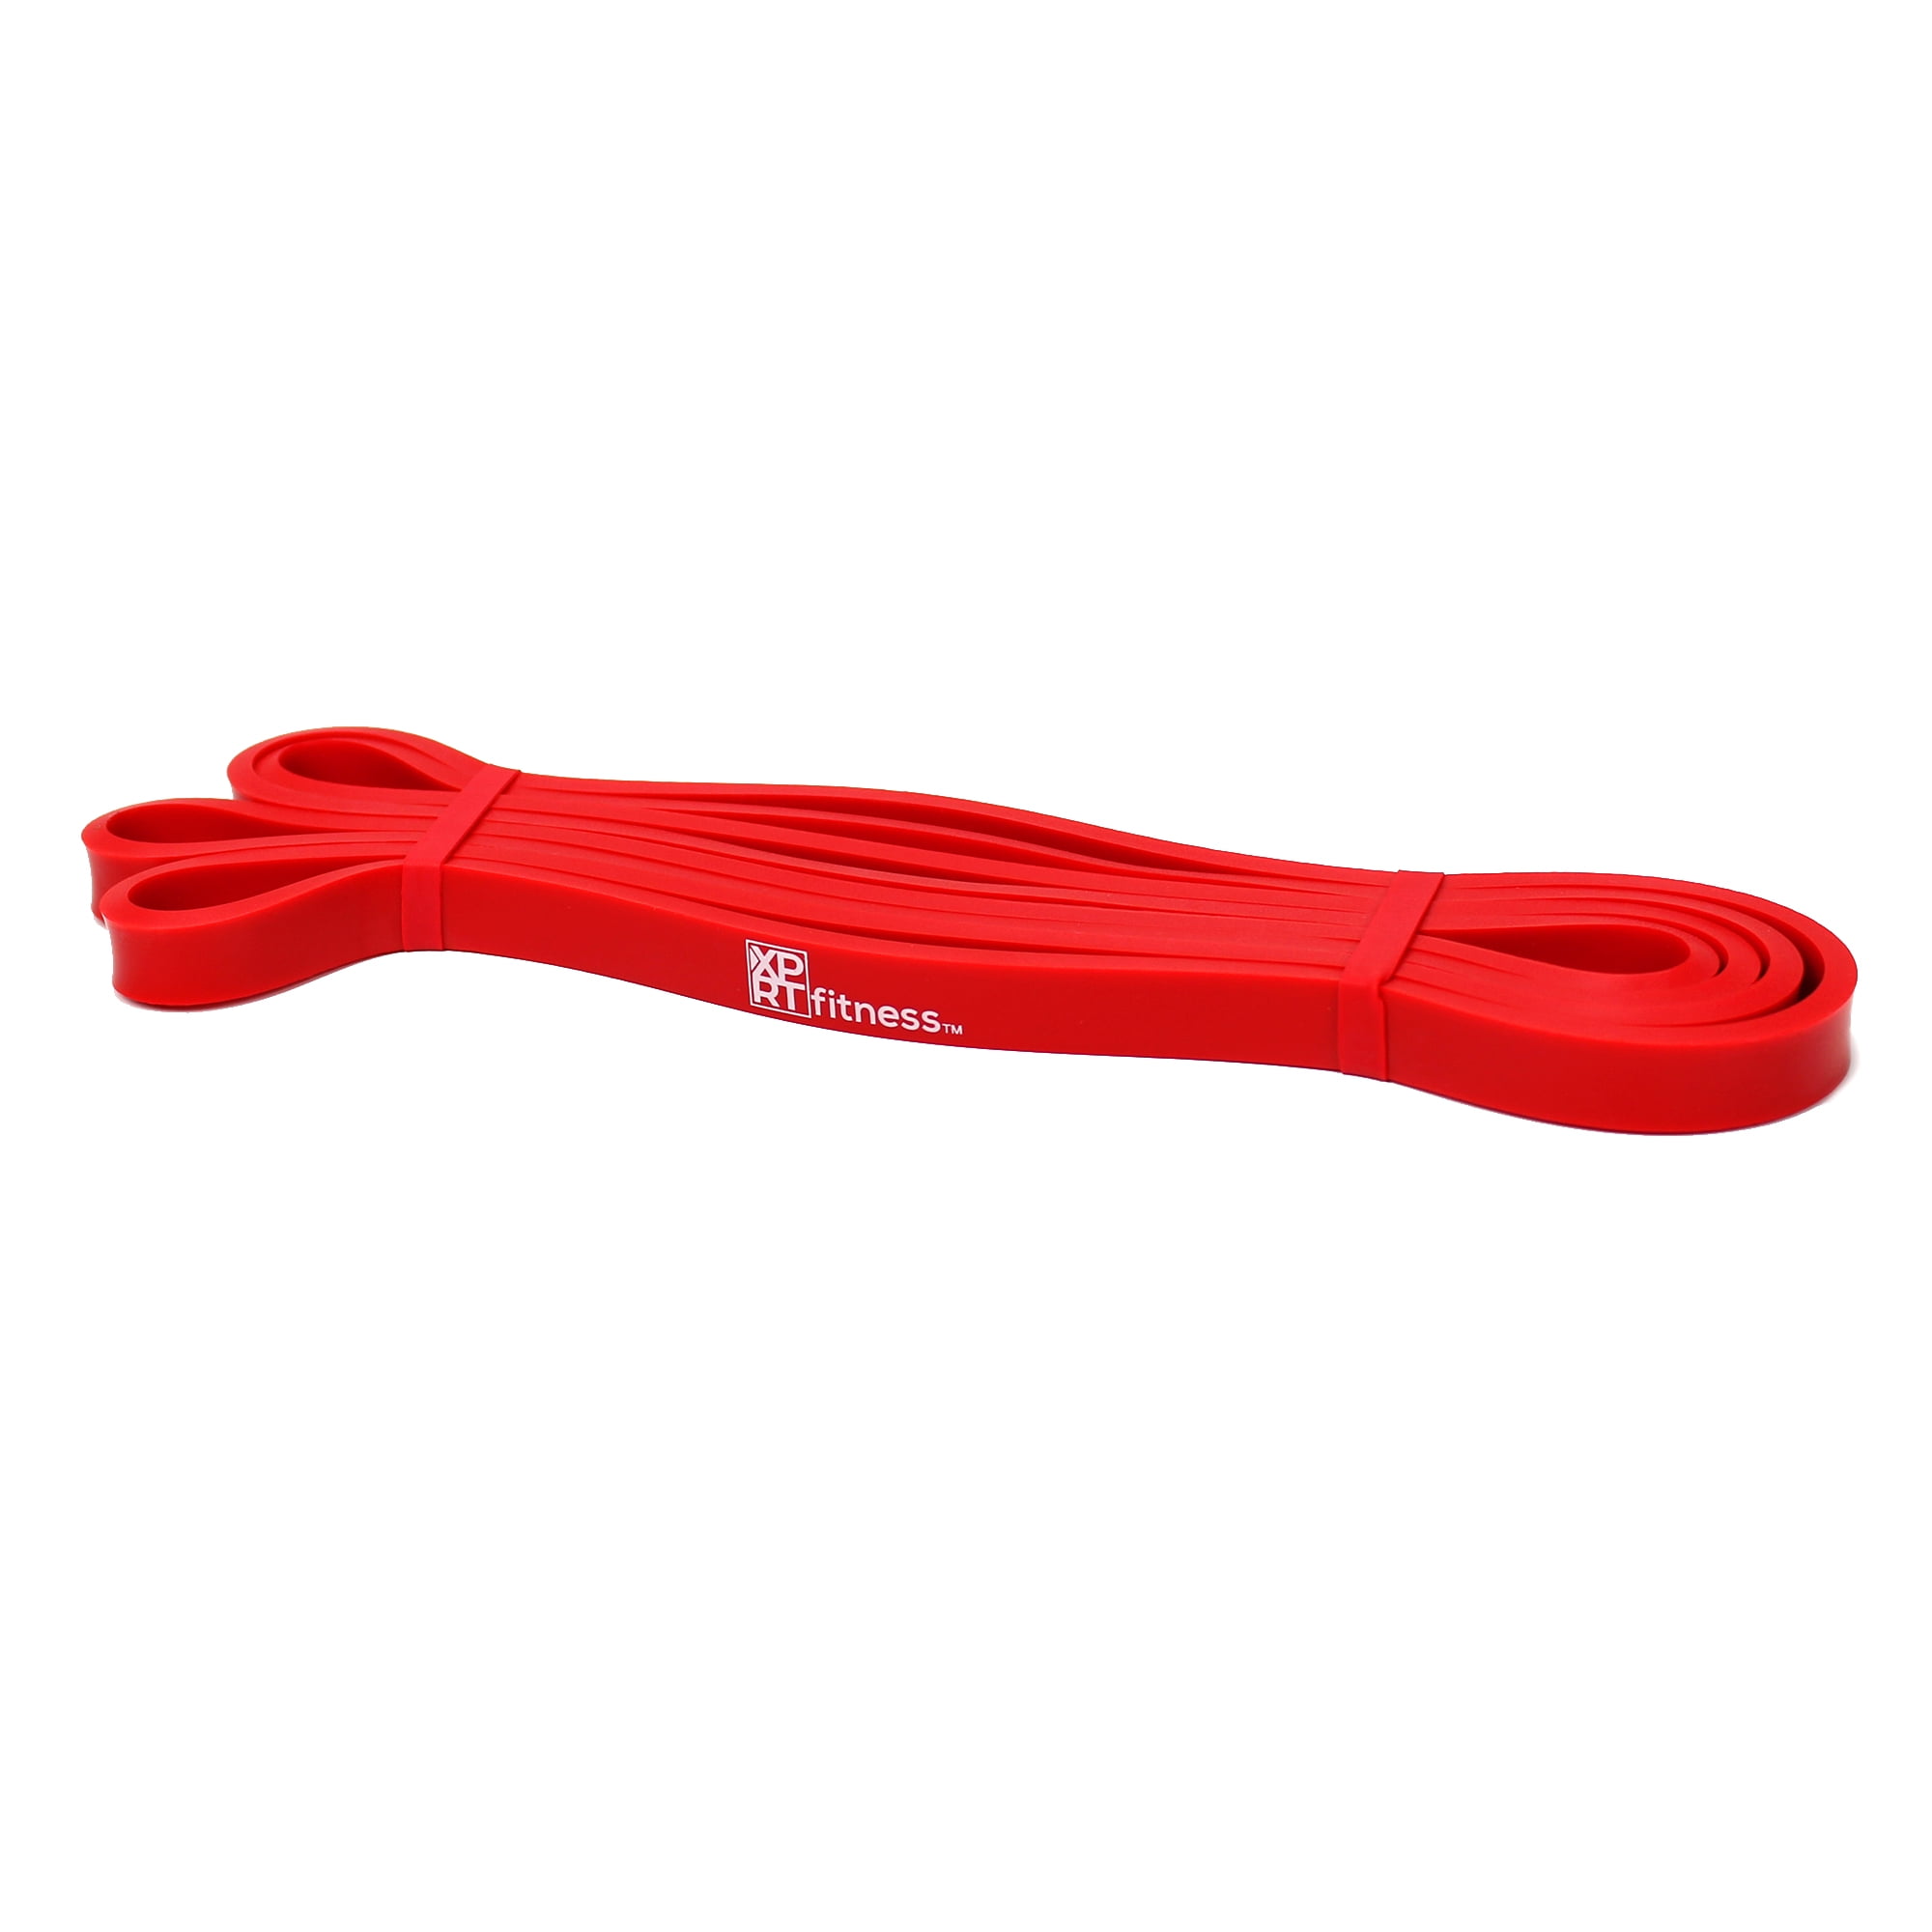 Powerlifting Band Resistance 26lb Squatting LIGHT Power Lift Stretch Band RED 